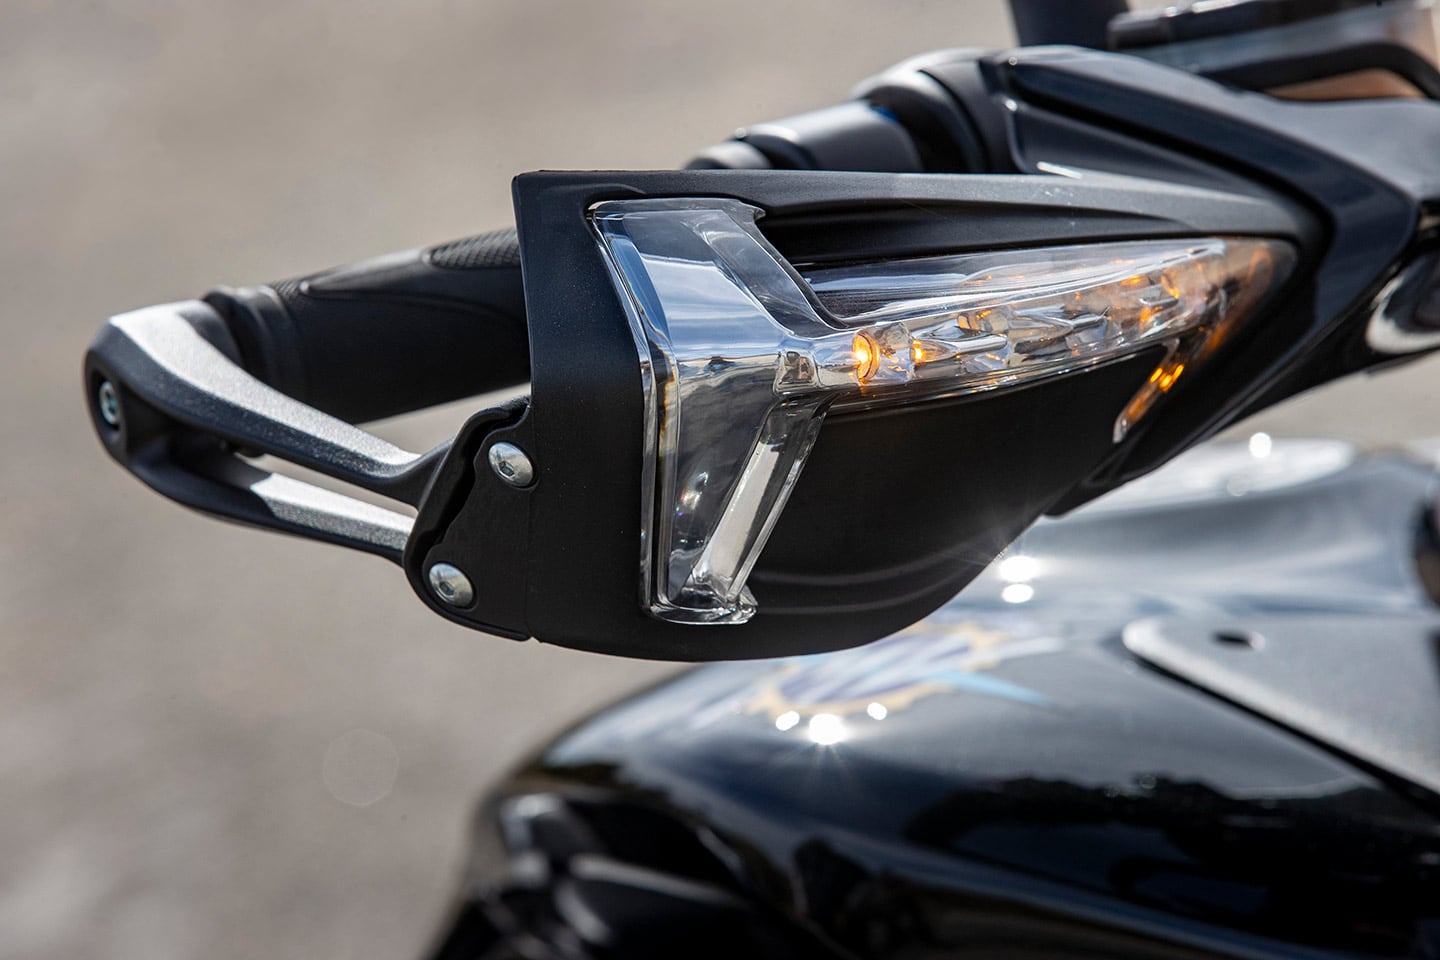 A lot of neat details on the Turismo Veloce Lusso SCS, like these hand guards with integrated turn signals. We’re big fans of having hand guards on anything with touring in the description.